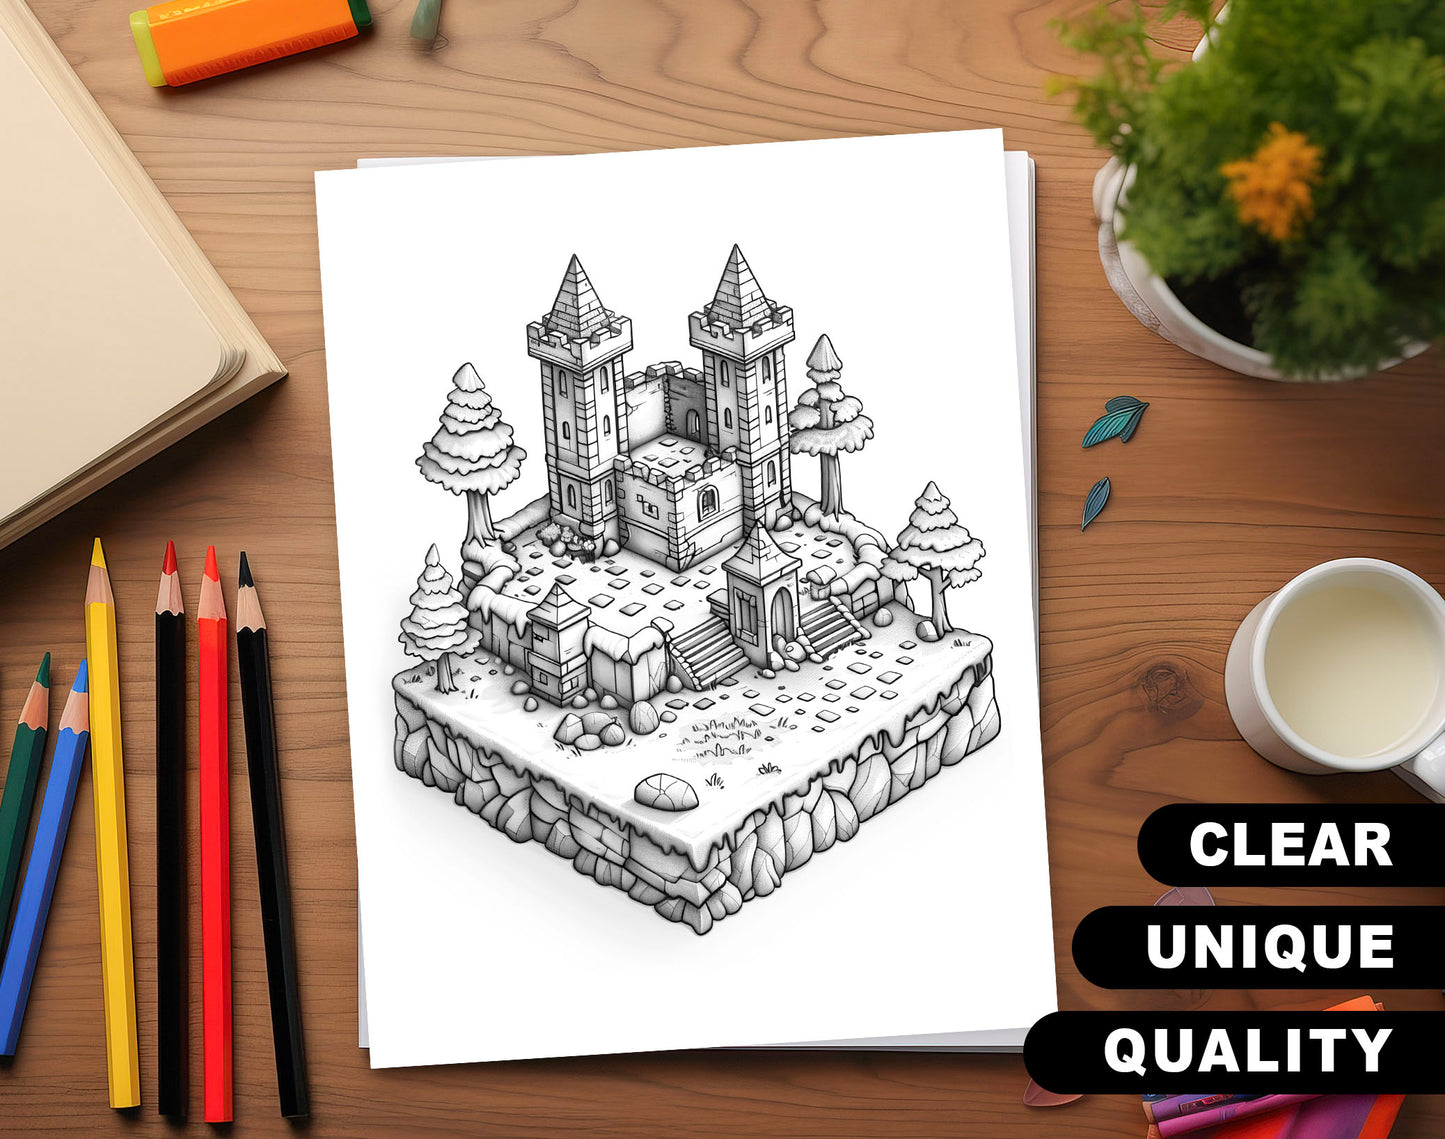 70 Diverse 3D Object Grayscale Coloring Pages - Instant Download - Printable Dark/Light